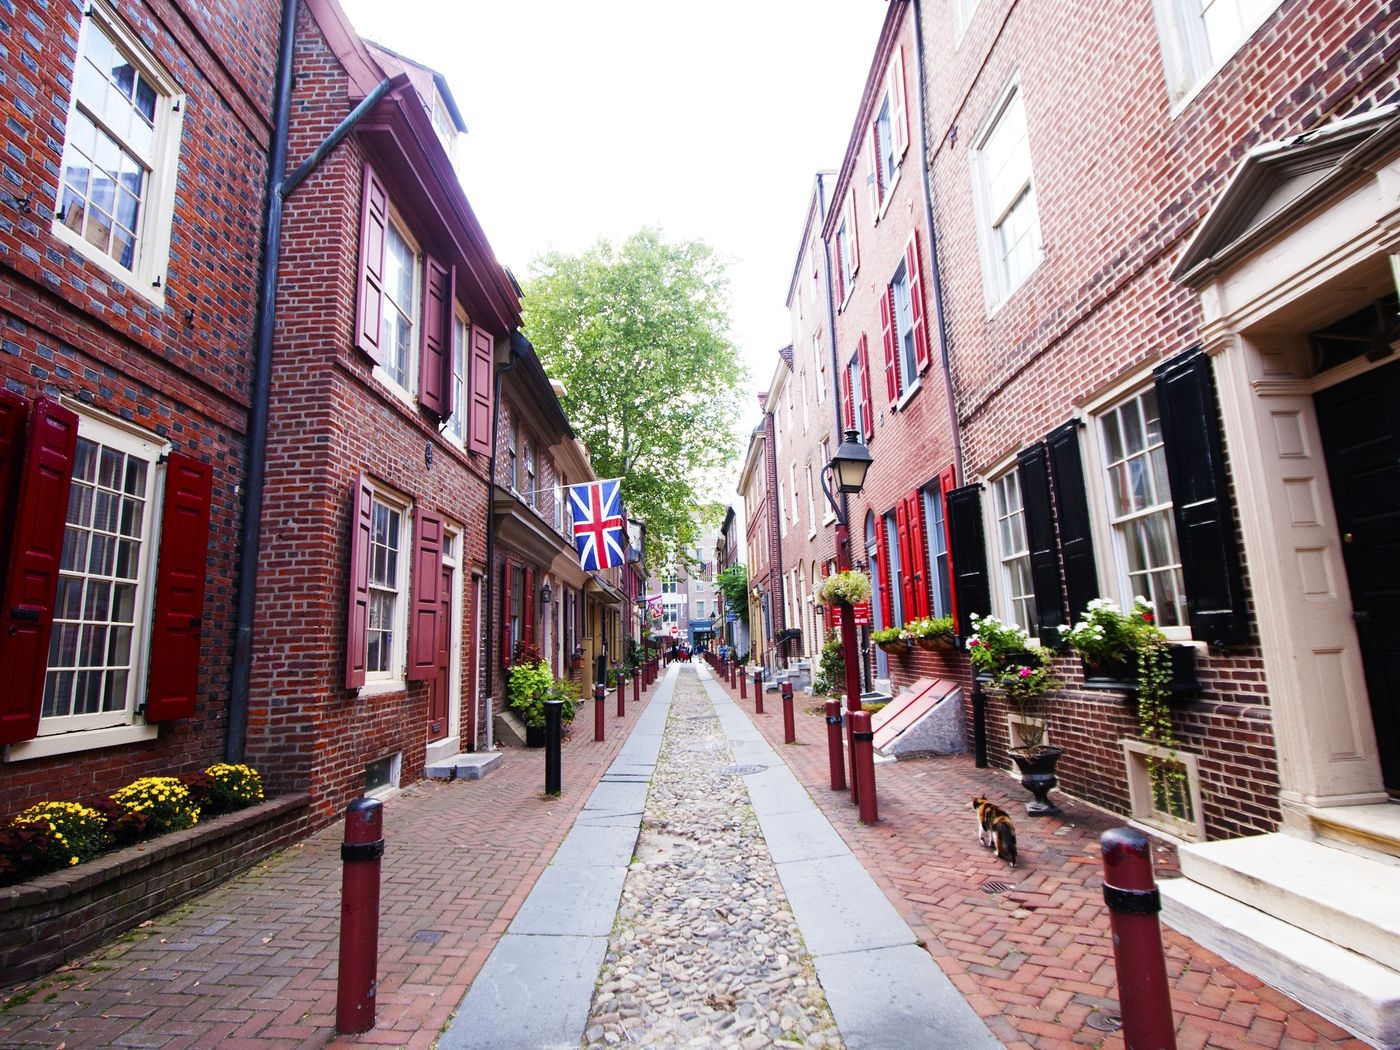 8 things tourists should never do in Philadelphia